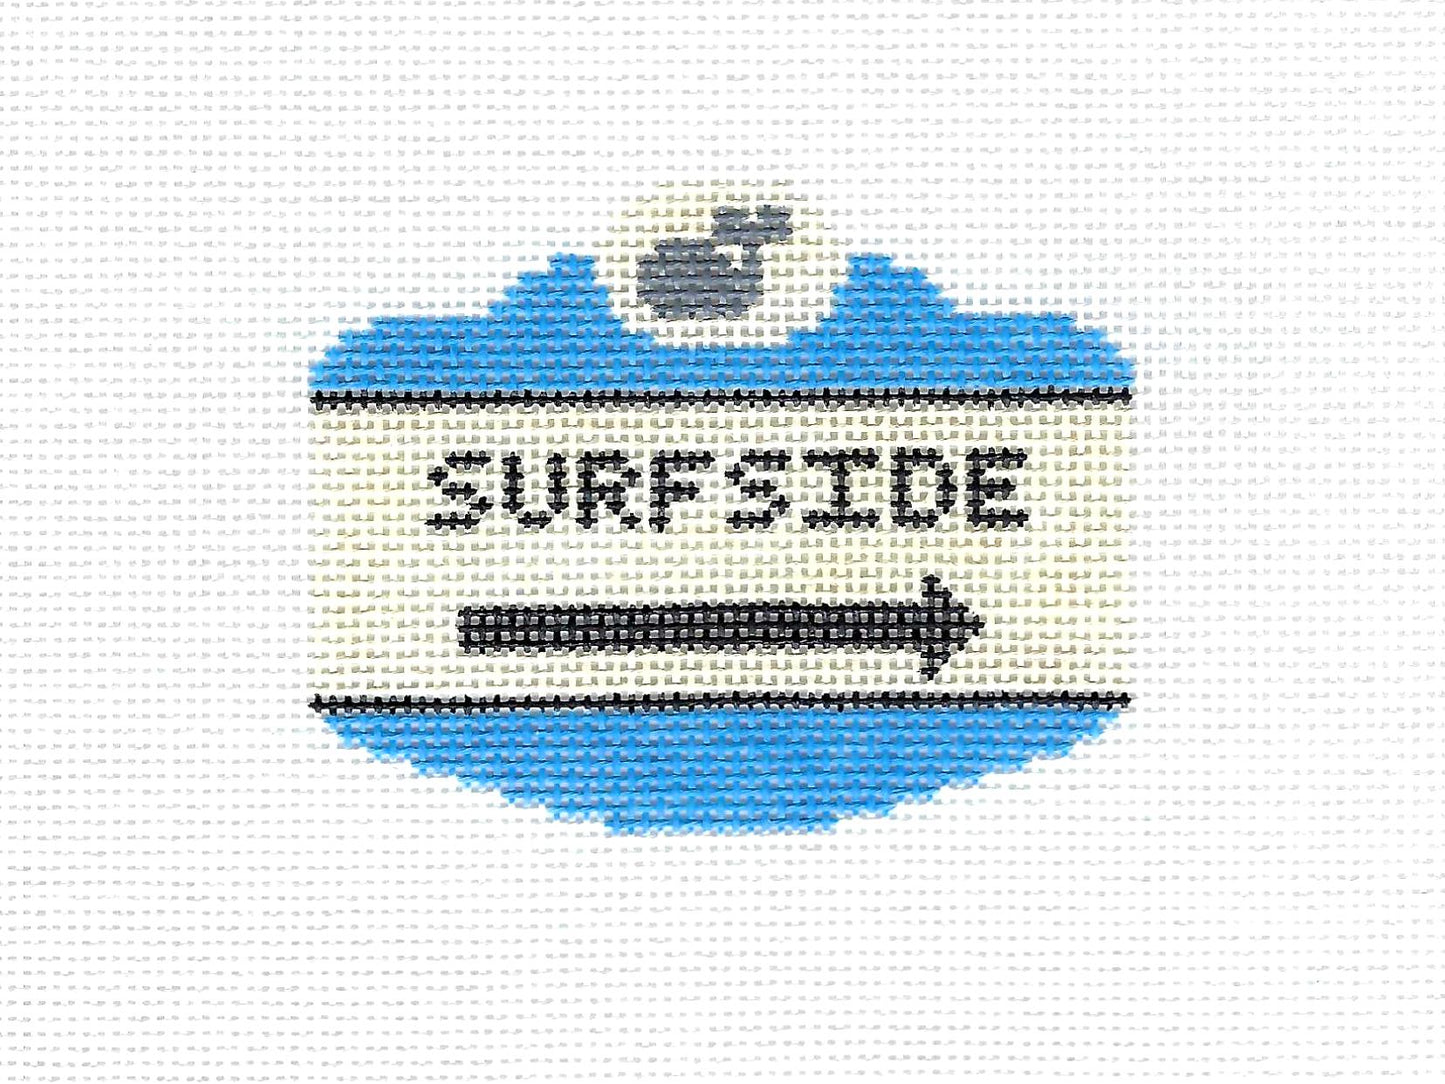 Travel Sign ~ SURFSIDE, NANTUCKET ISLAND, MASS. SIGN handpainted Needlepoint Canvas by Silver Needle